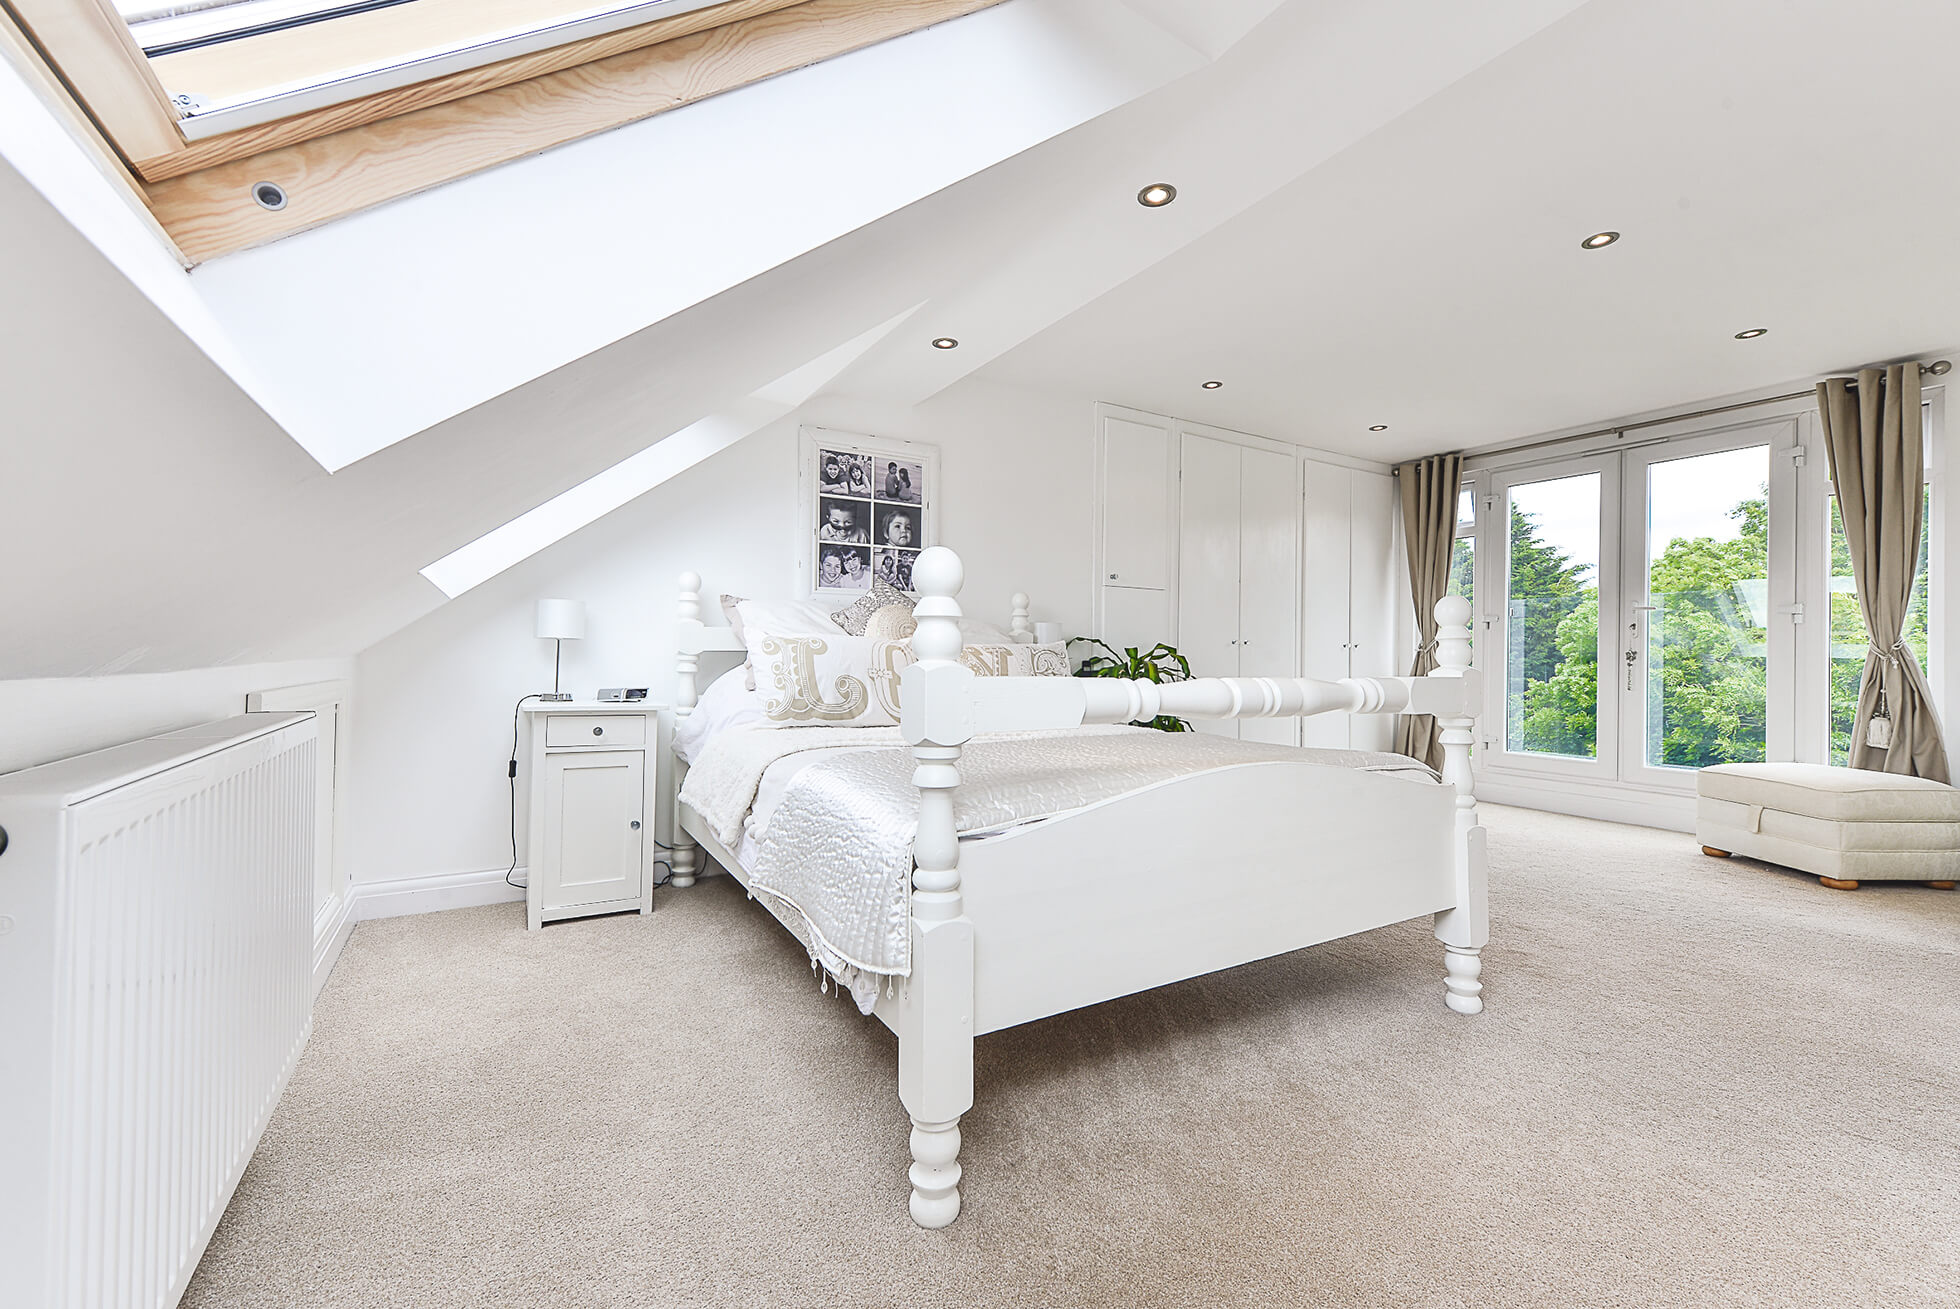 Do you have a question about converting your Loft in Watton-at-Stone? Here are the most popular questions asked by our clients.